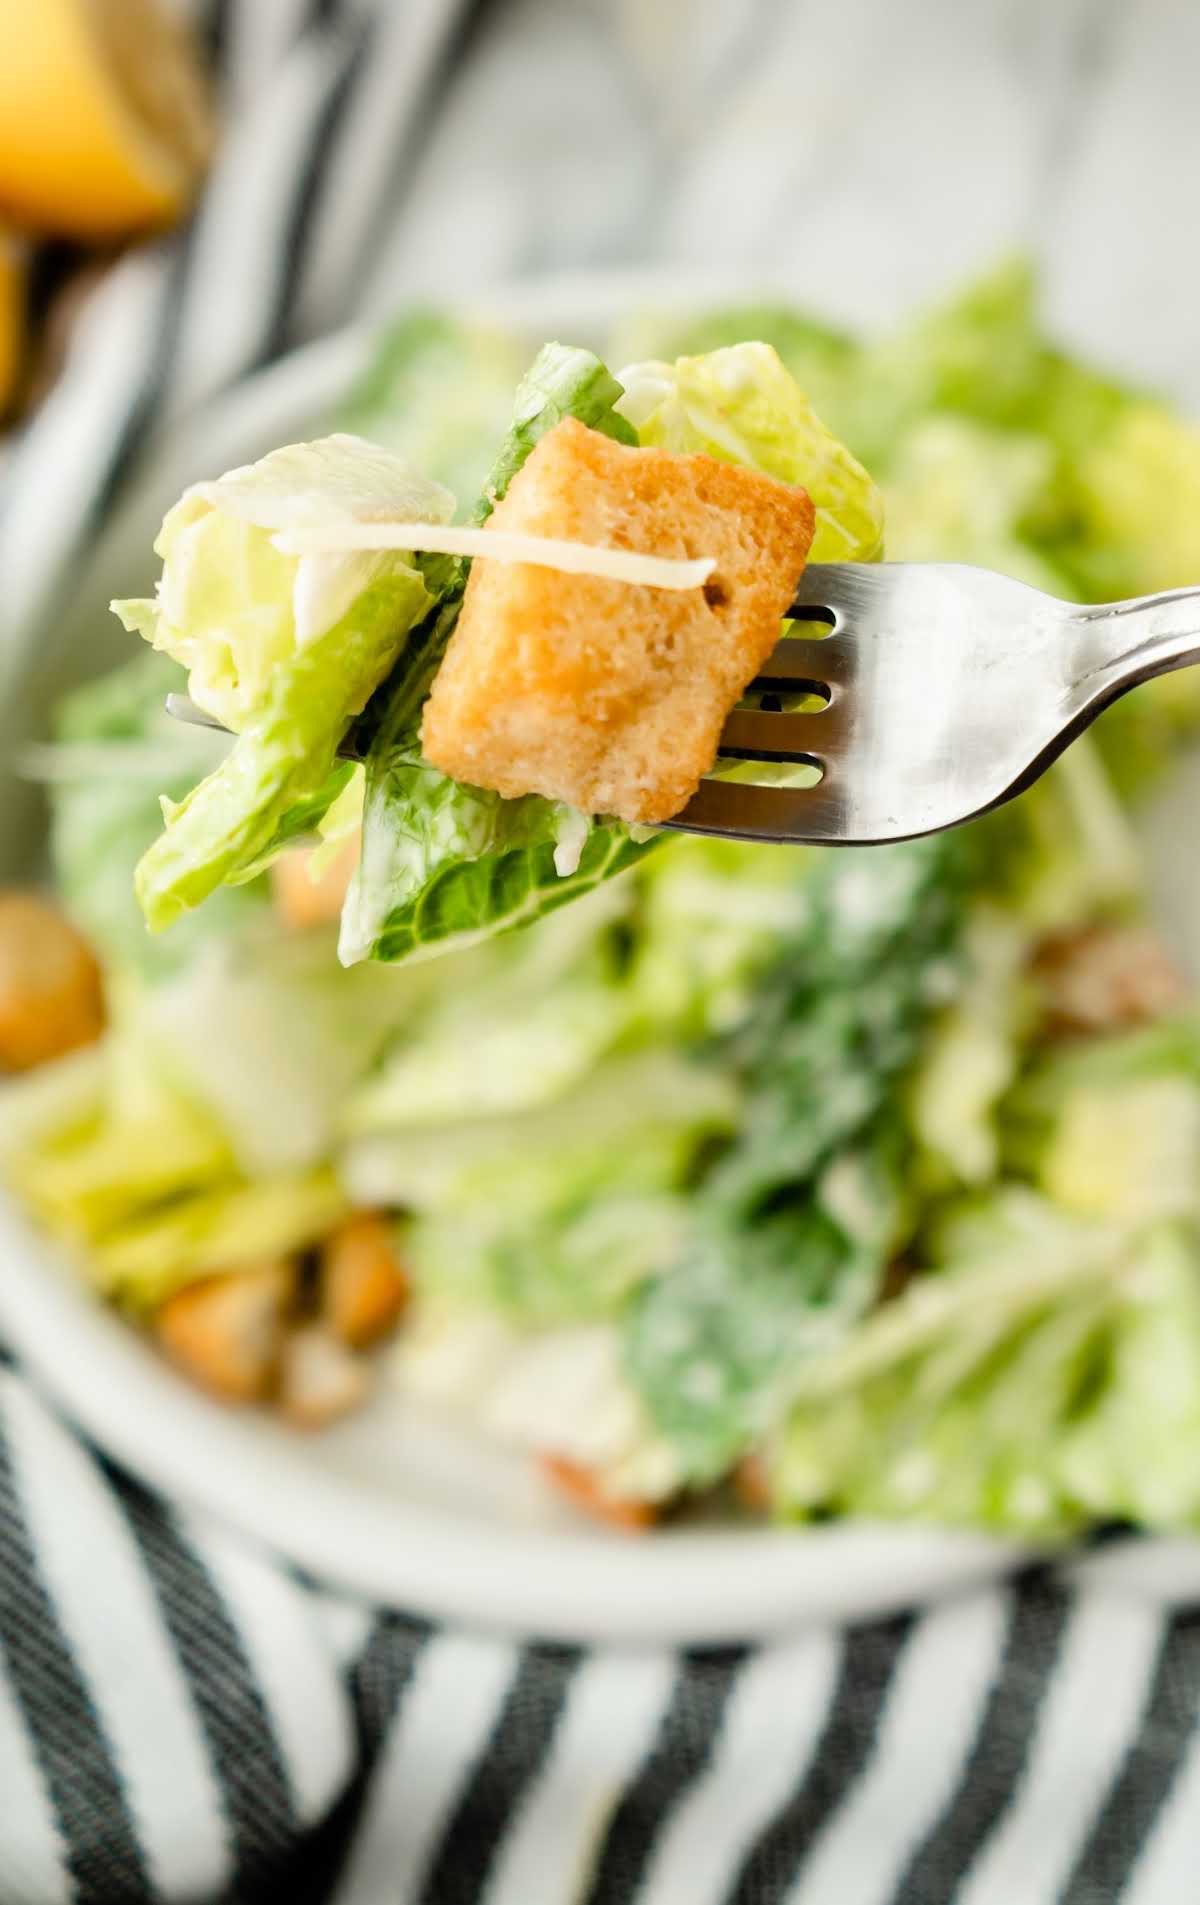 A bowl of salad on a plate, with Caesar salad and Lettuce